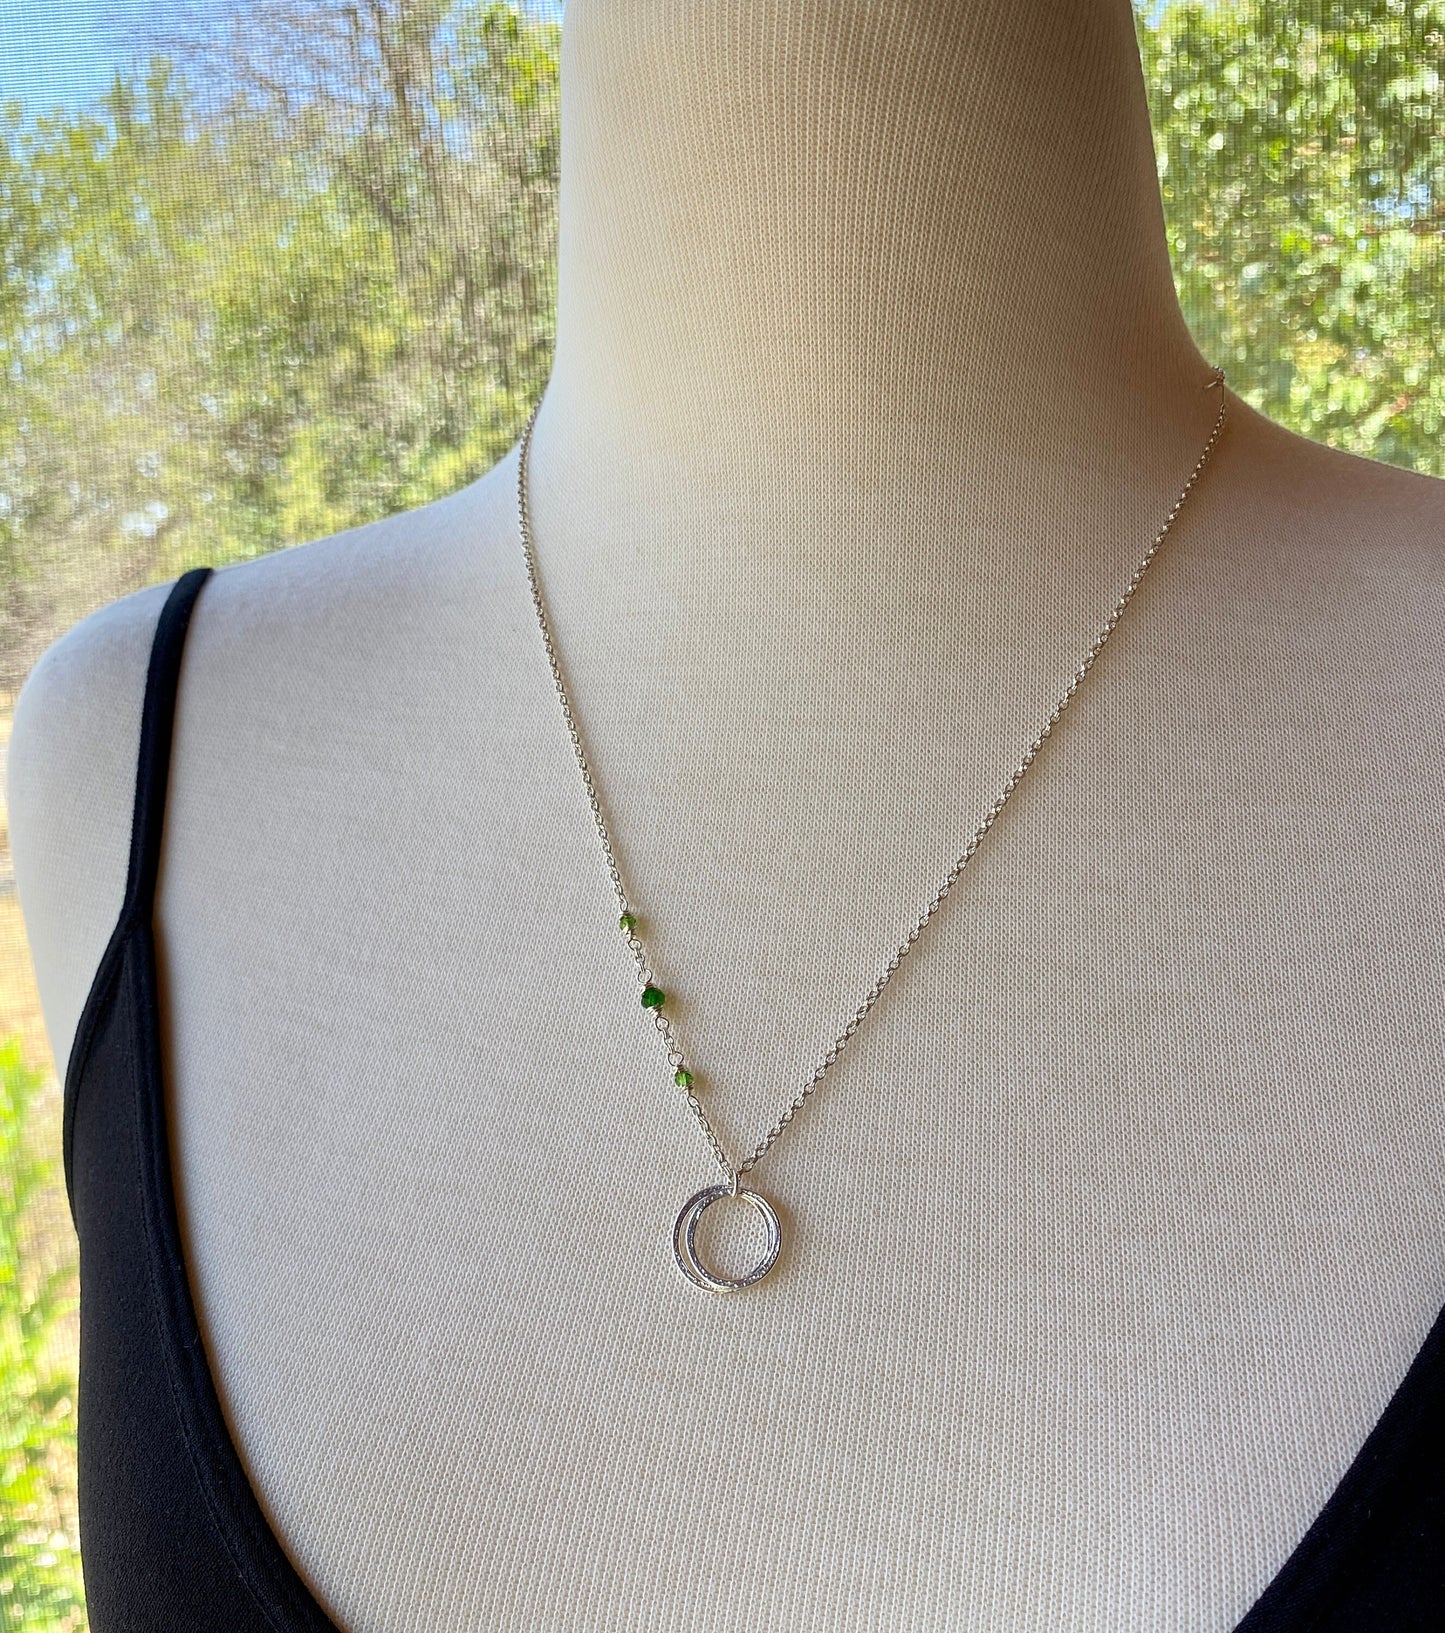 20th Birthday Minimalist Necklace with Birthstones, Sterling Silver 2 Rings for 2 Decades Milestone Jewelry, 2 Circle Necklace, Love, Unity